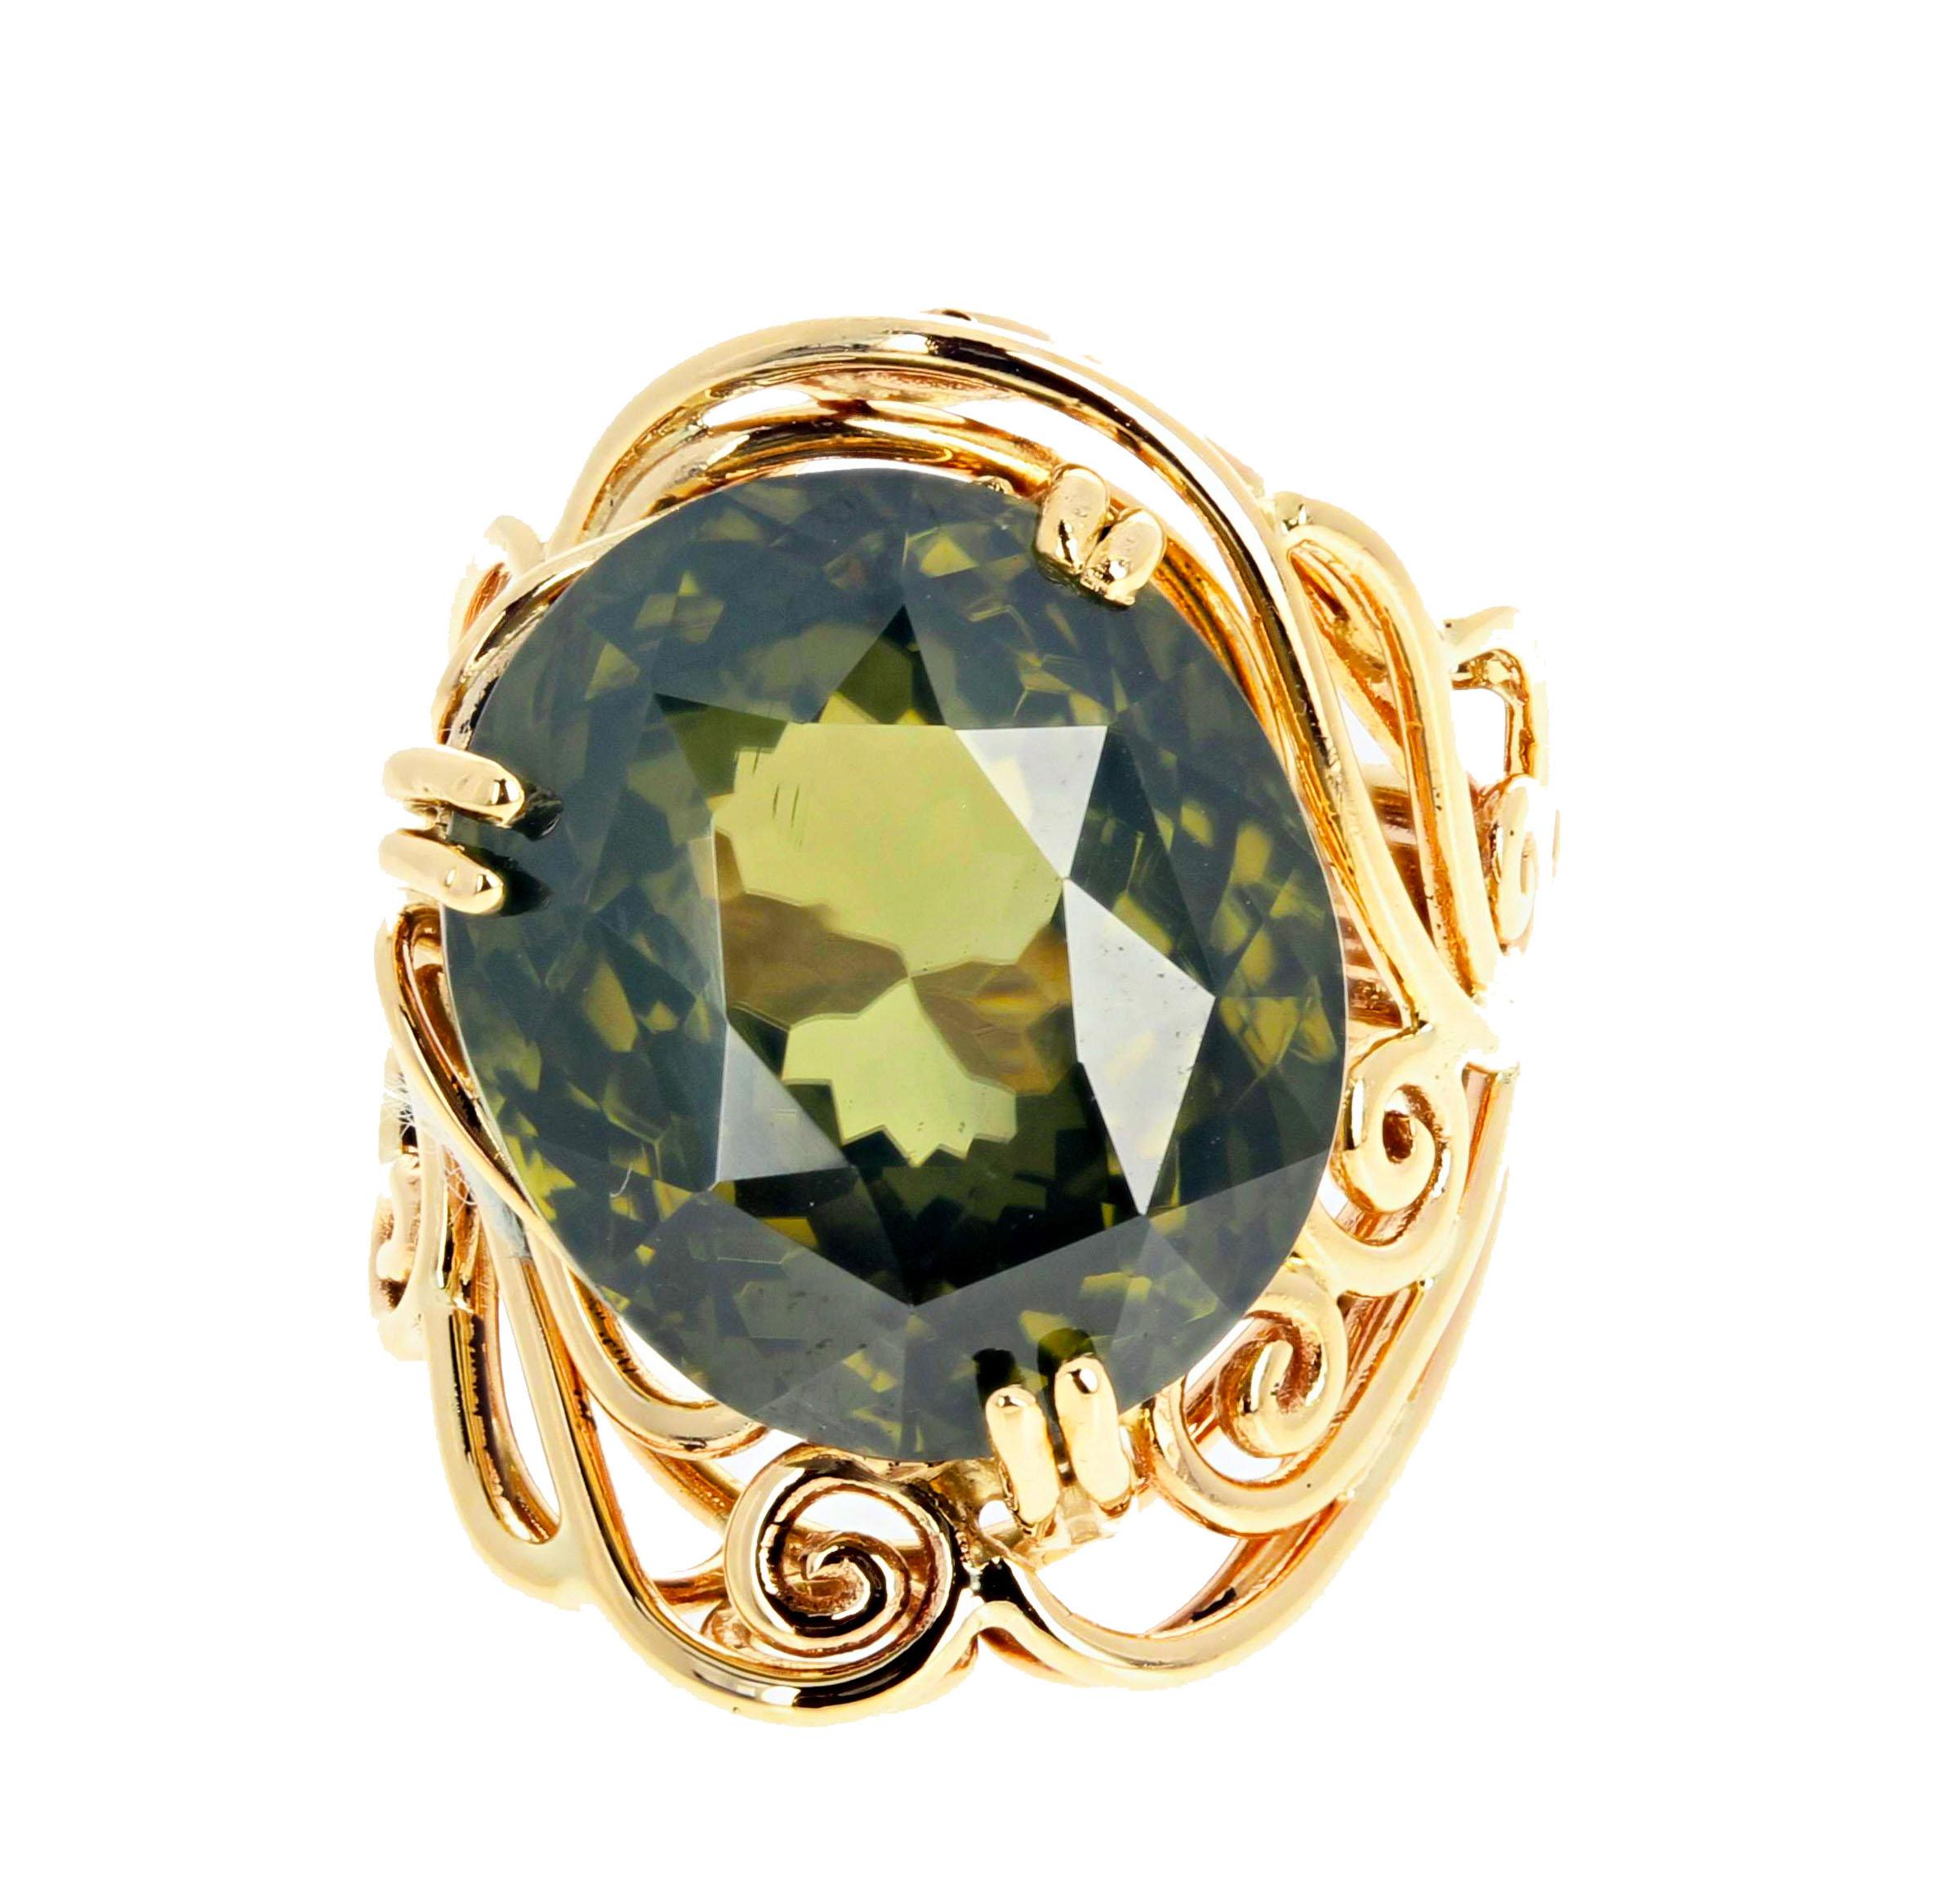 Oval Cut AJD Rare ENORMOUS Gemstone 19.4 Ct Natural Green Zircon Yellow Gold Ring For Sale